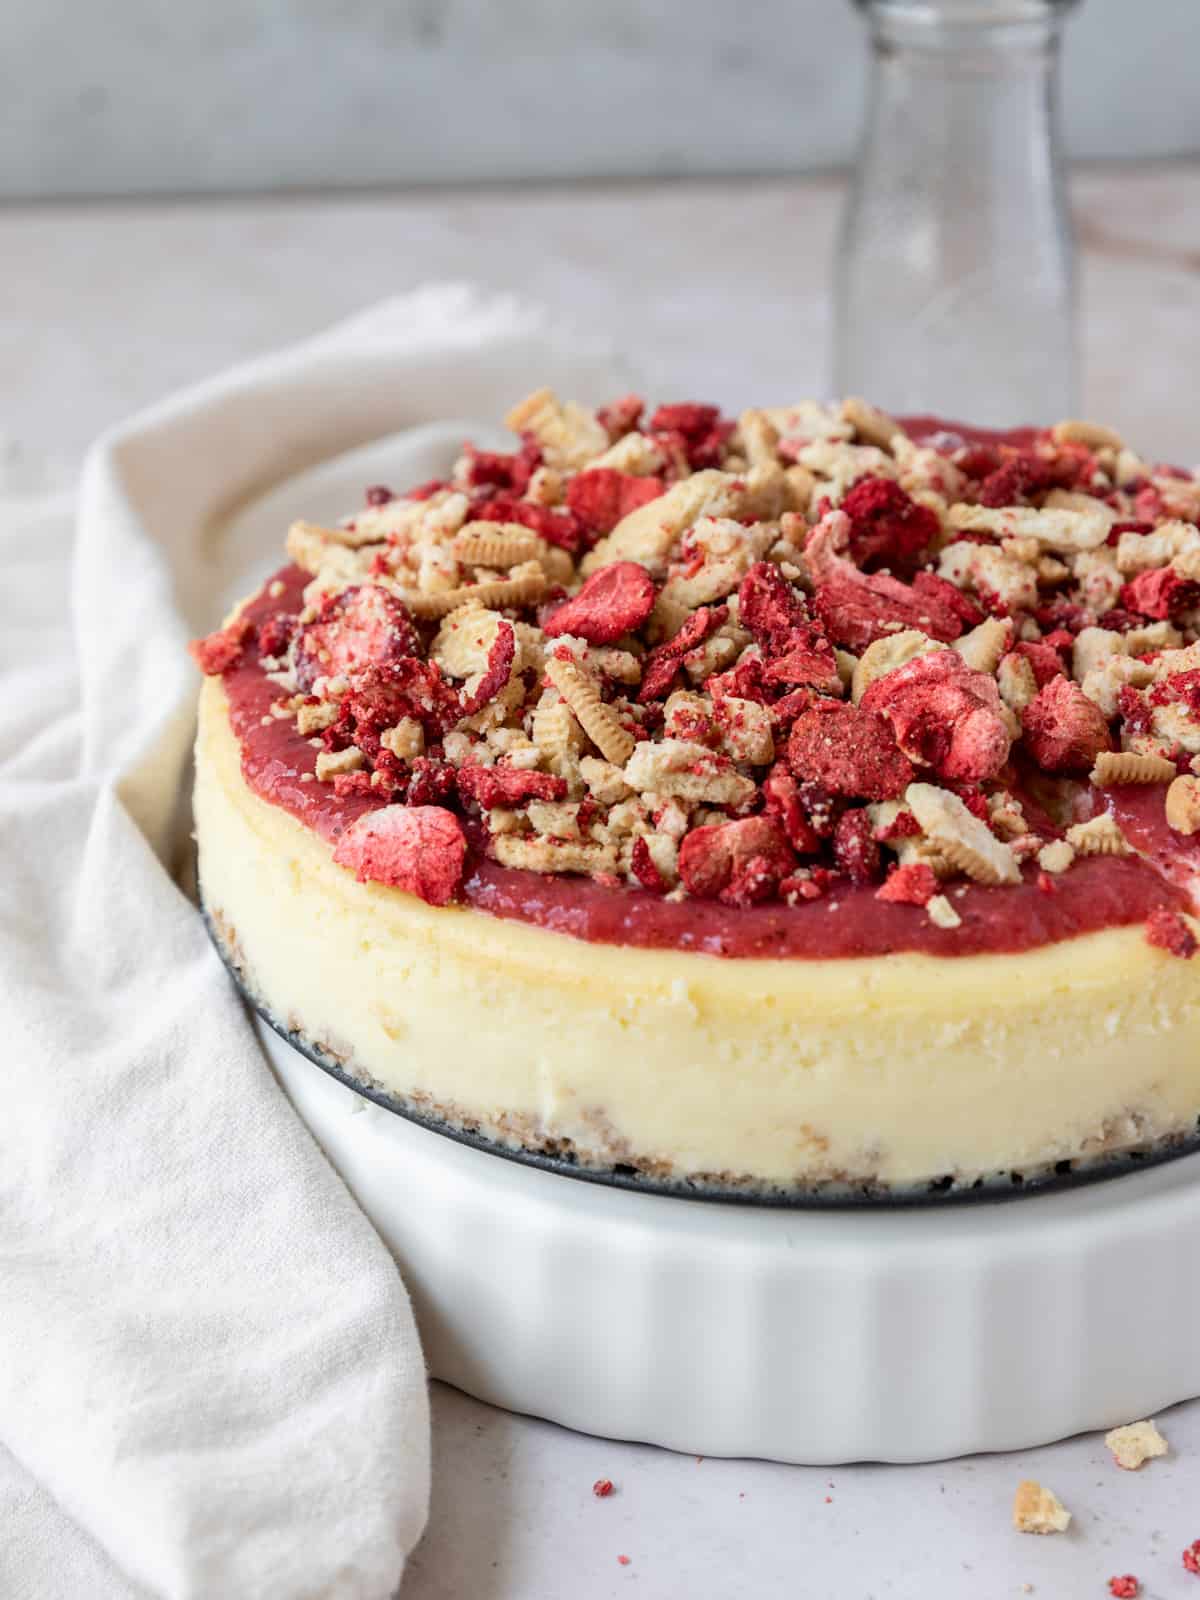 a full strawberry crunch cheesecake on a white dish with a cream colored linen laying next to it